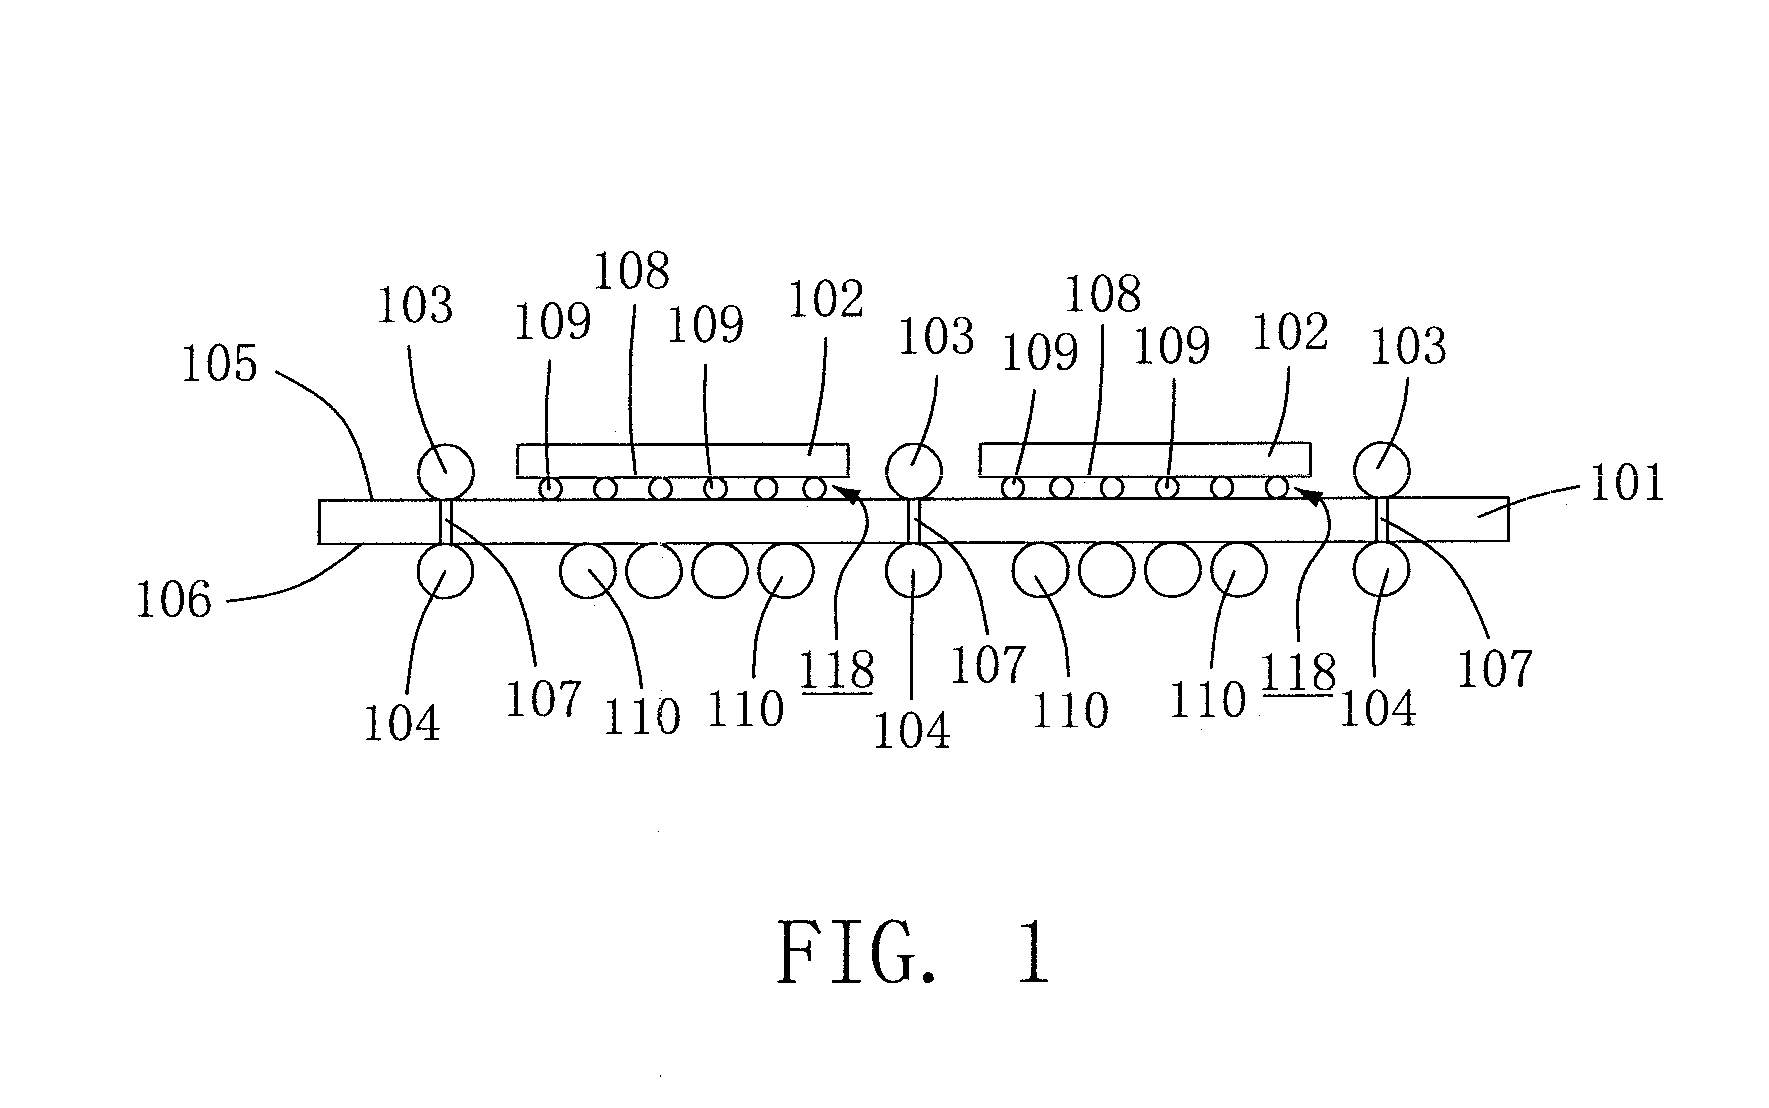 Semiconductor package with electromagnetic shielding capabilites